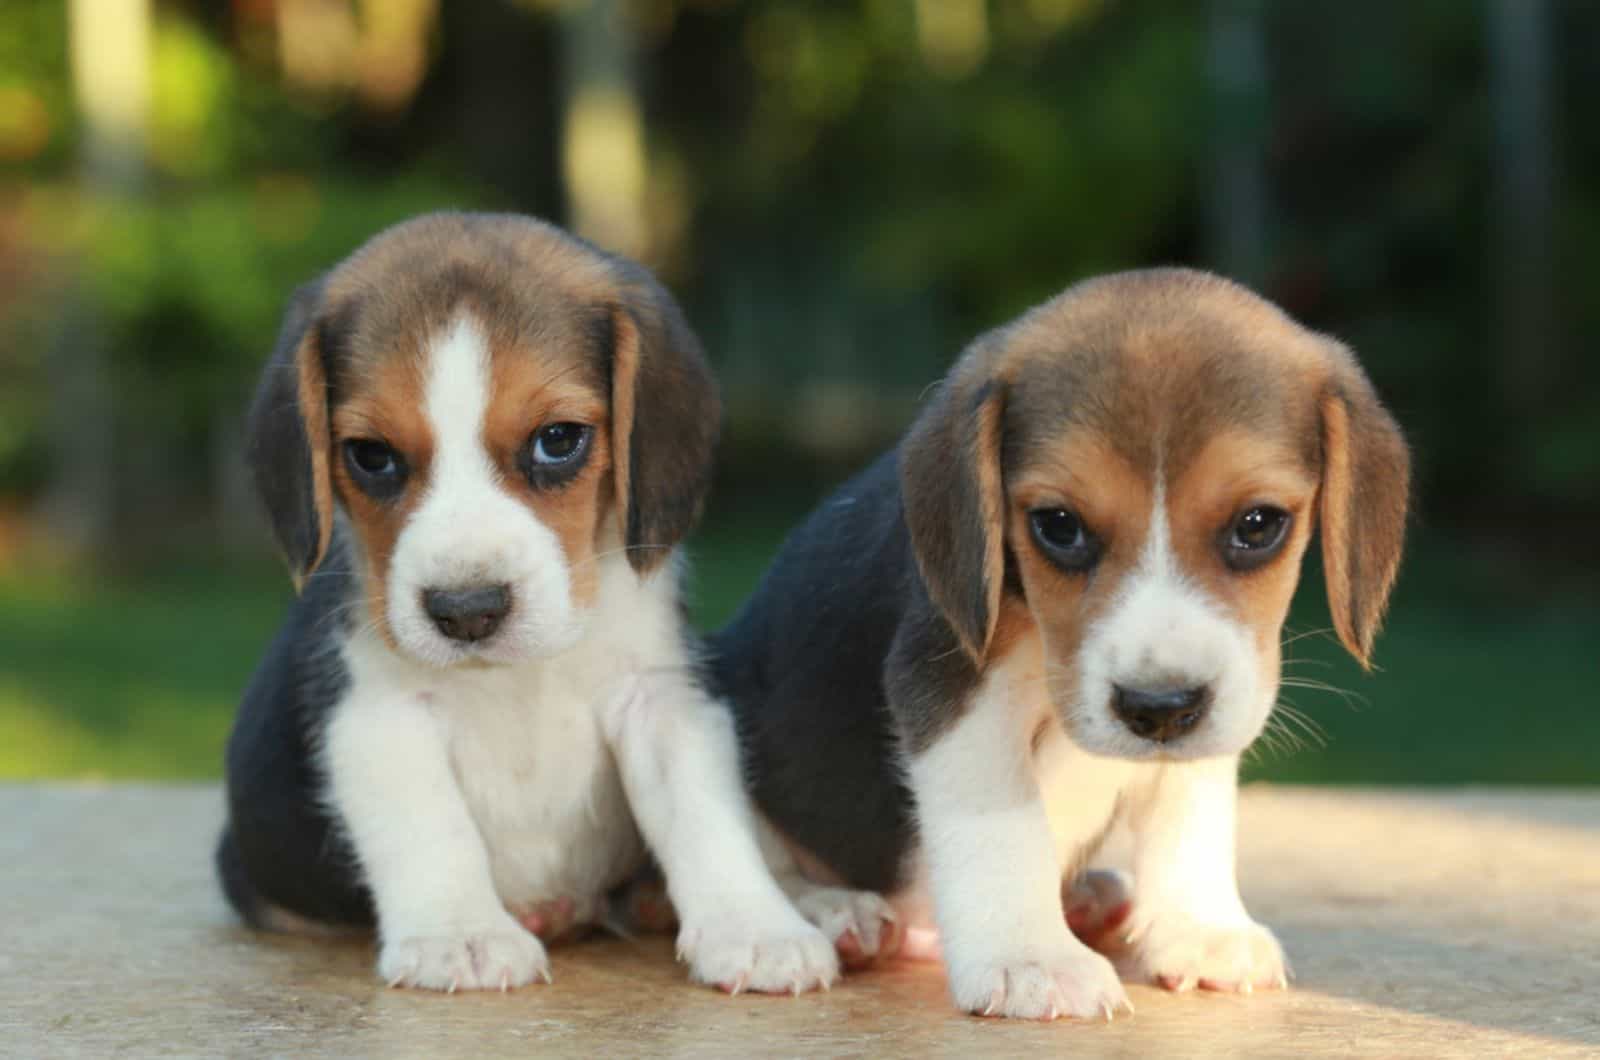 two beagle puppies sitting together